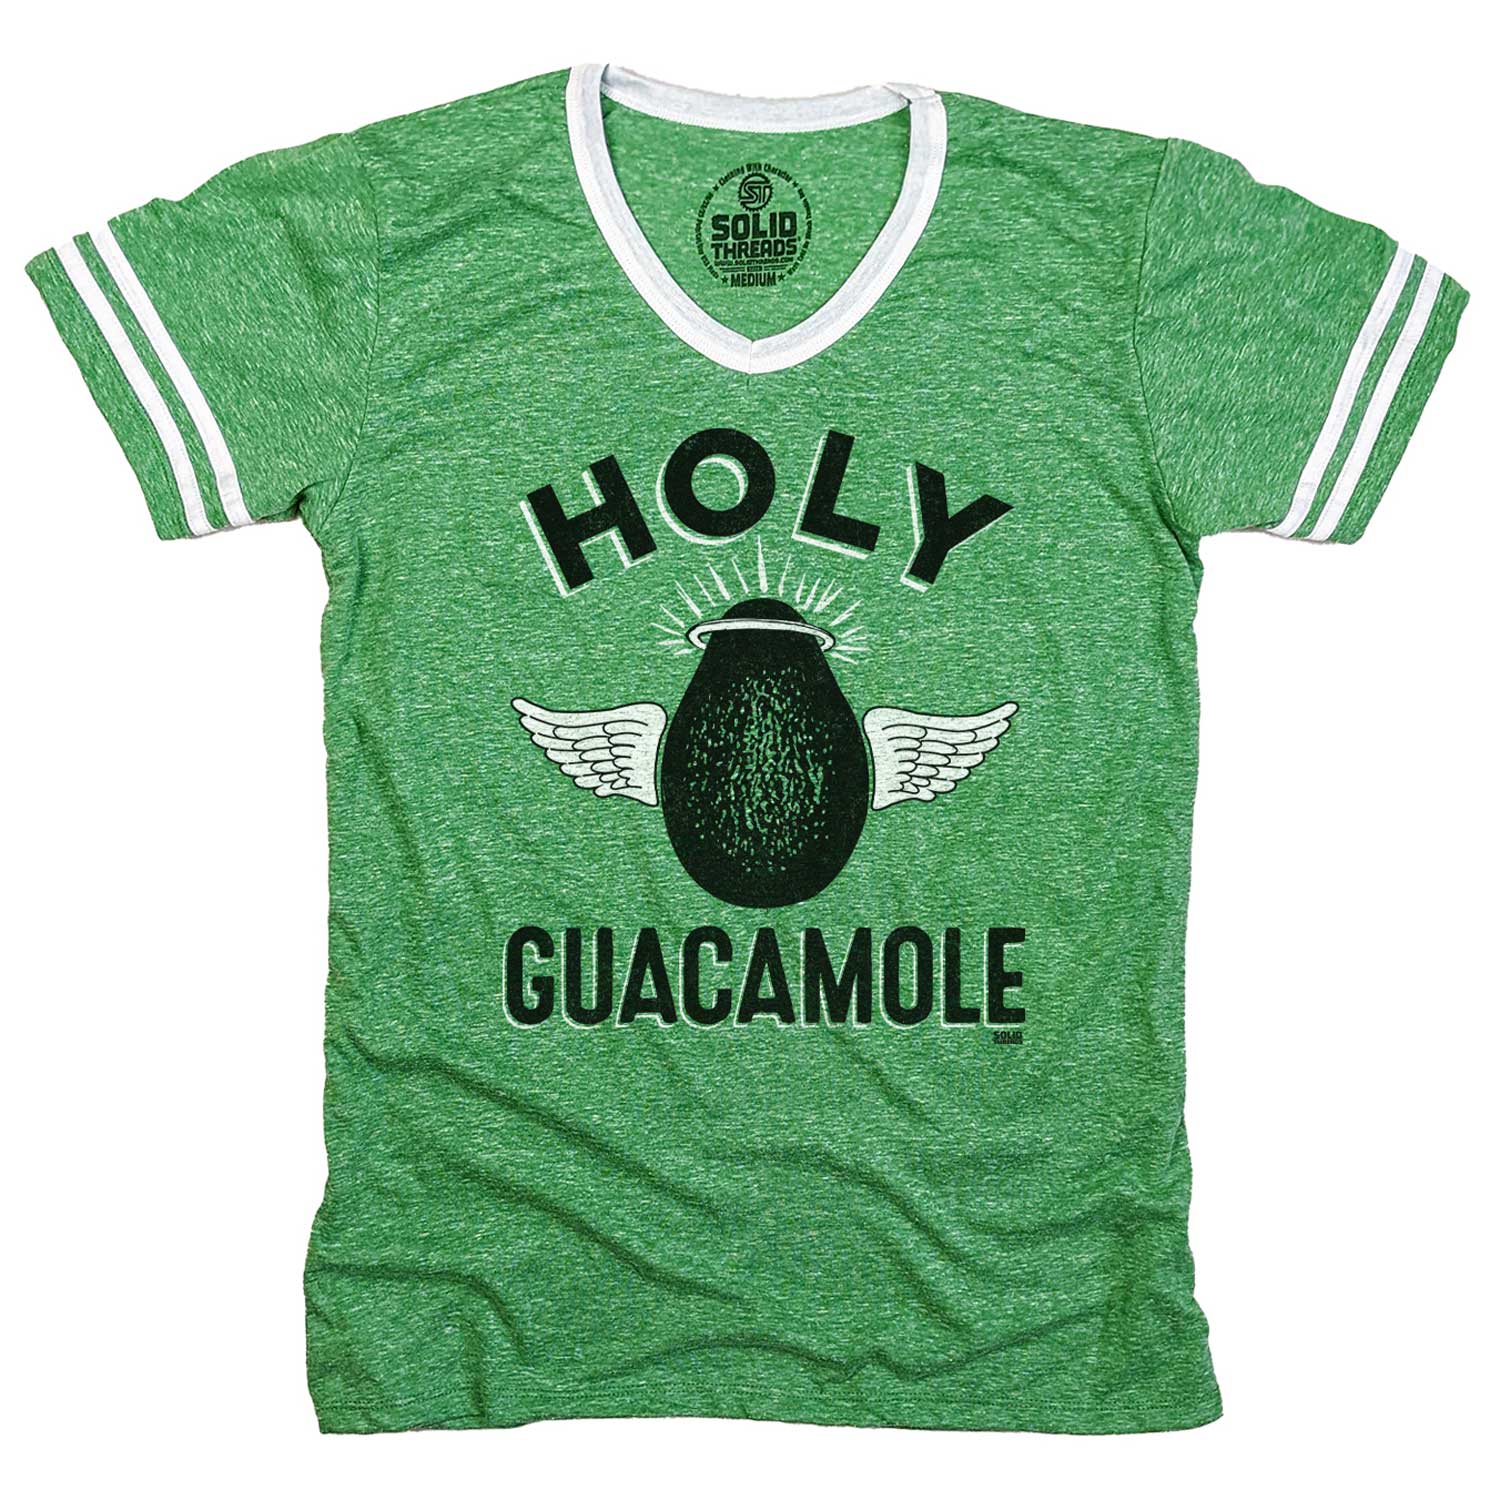 Men's Cool Holy Guacamole Retro Graphic V-neck Tee | Funny Avocado Shirt for Foodie | SOLID THREADS